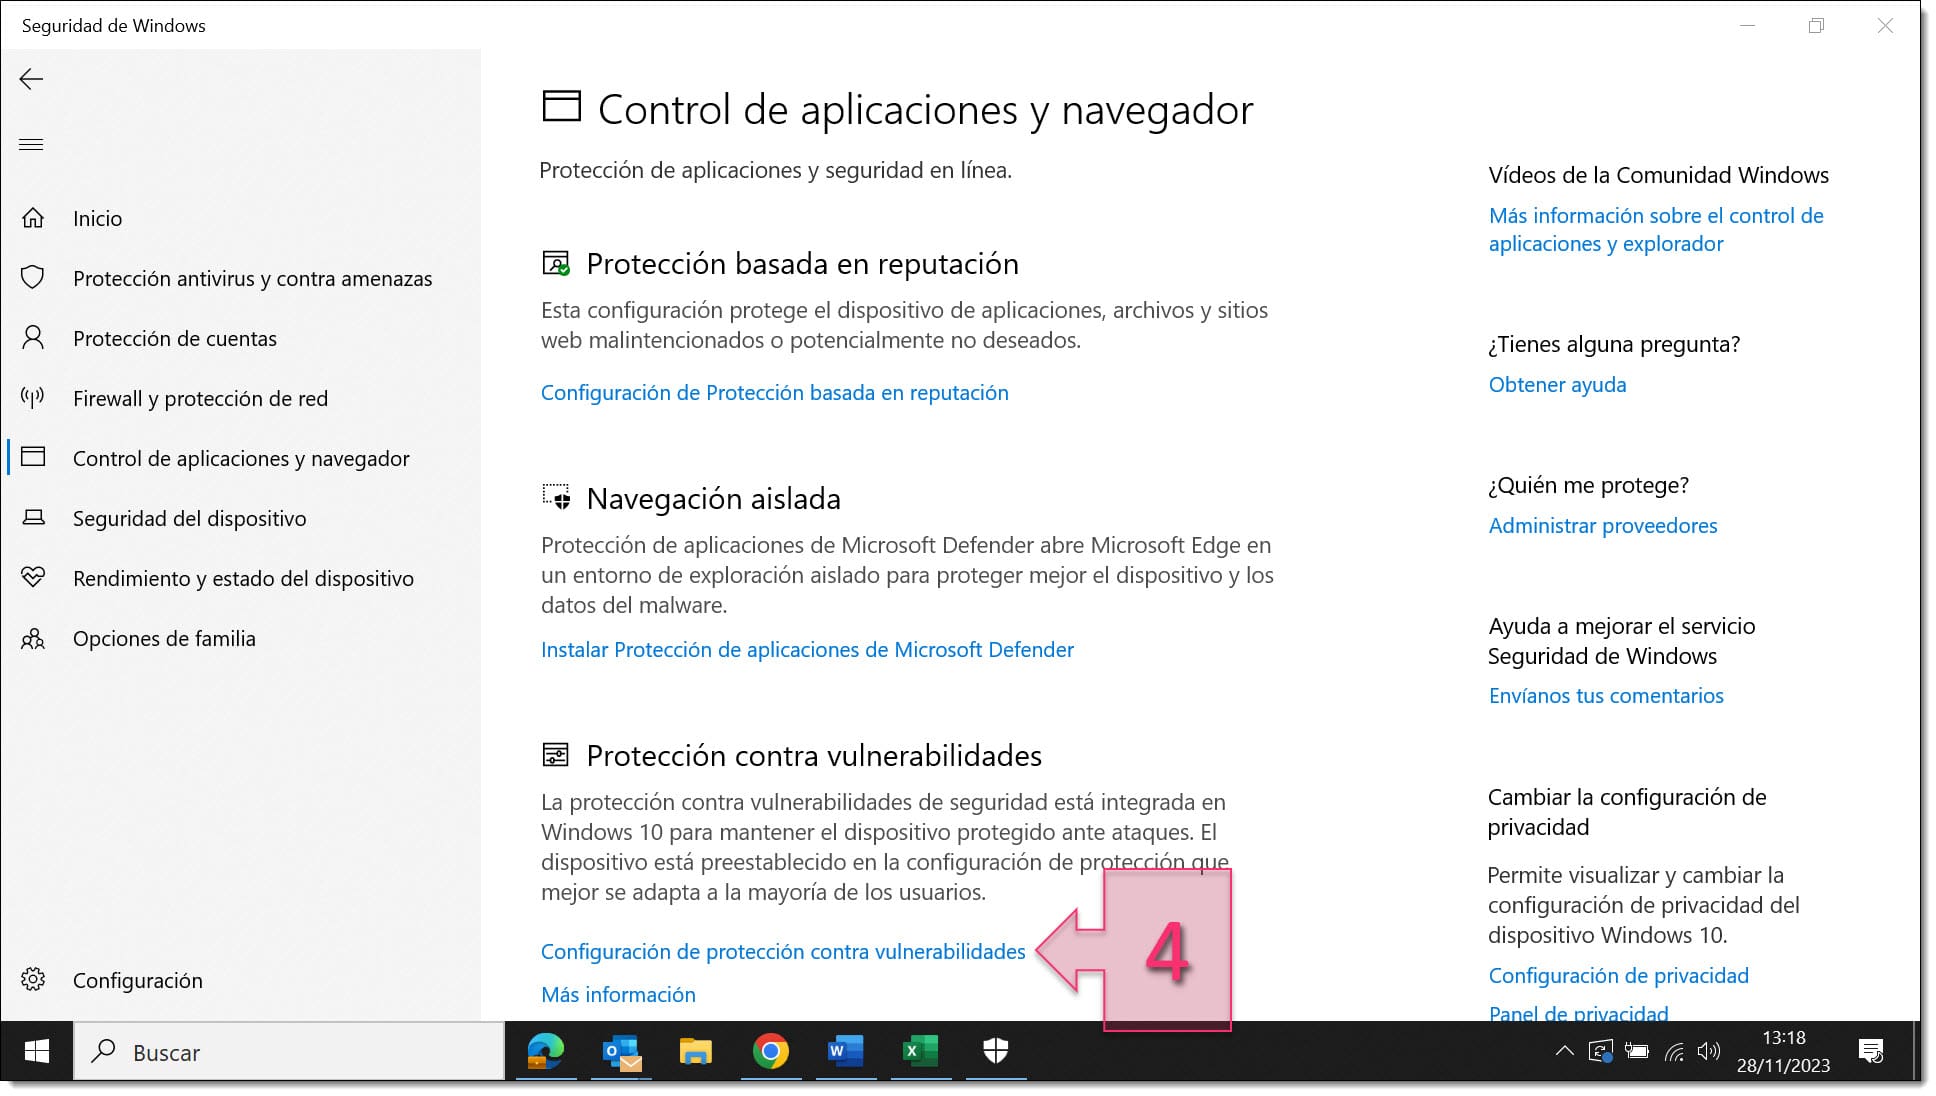 Screenshot of Apps & browser control screen on Windows